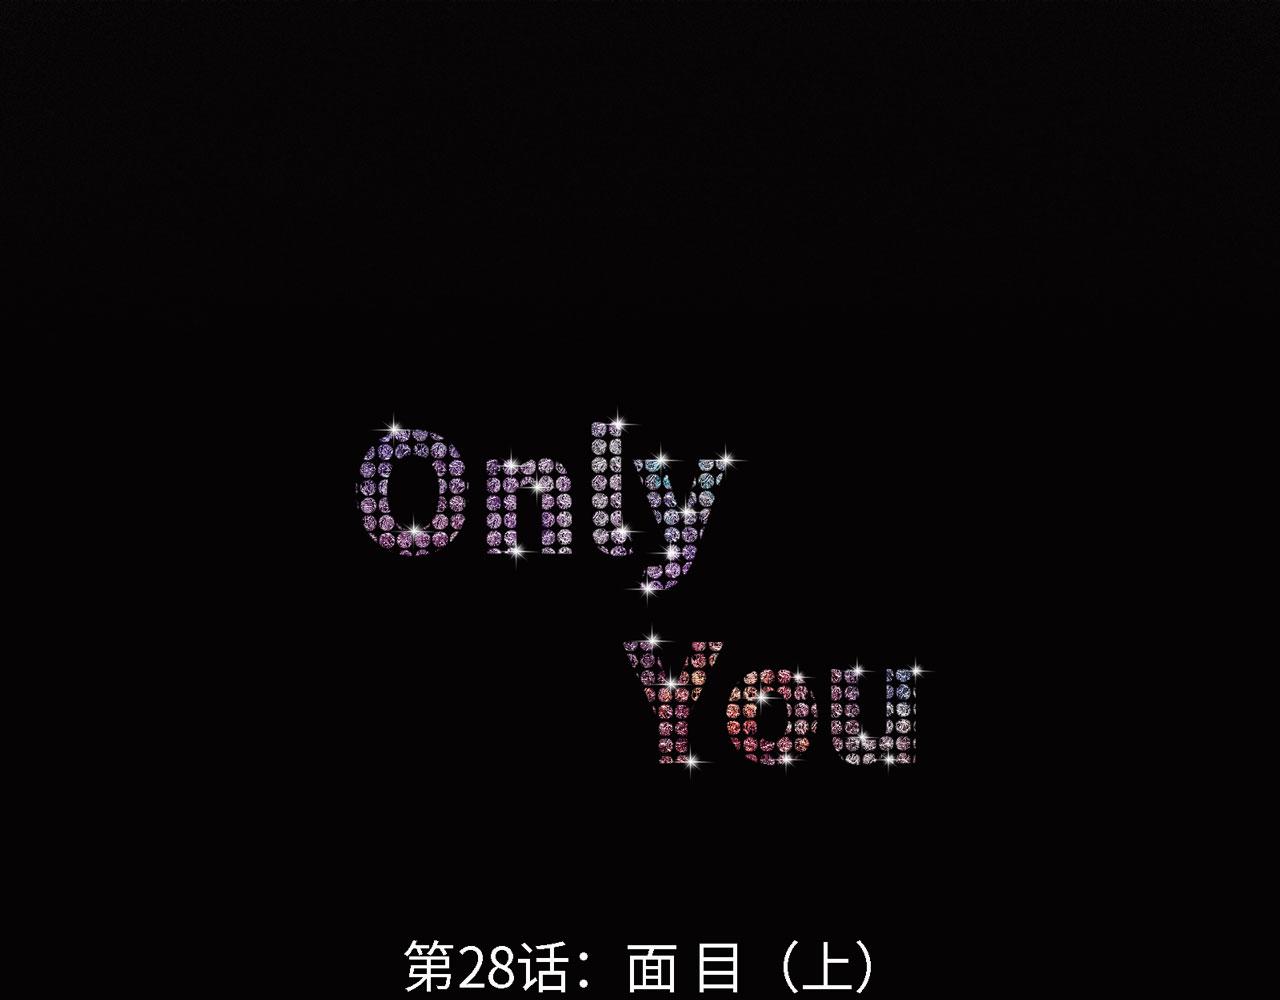 Only You - 第28話 面目（上）(1/3) - 1